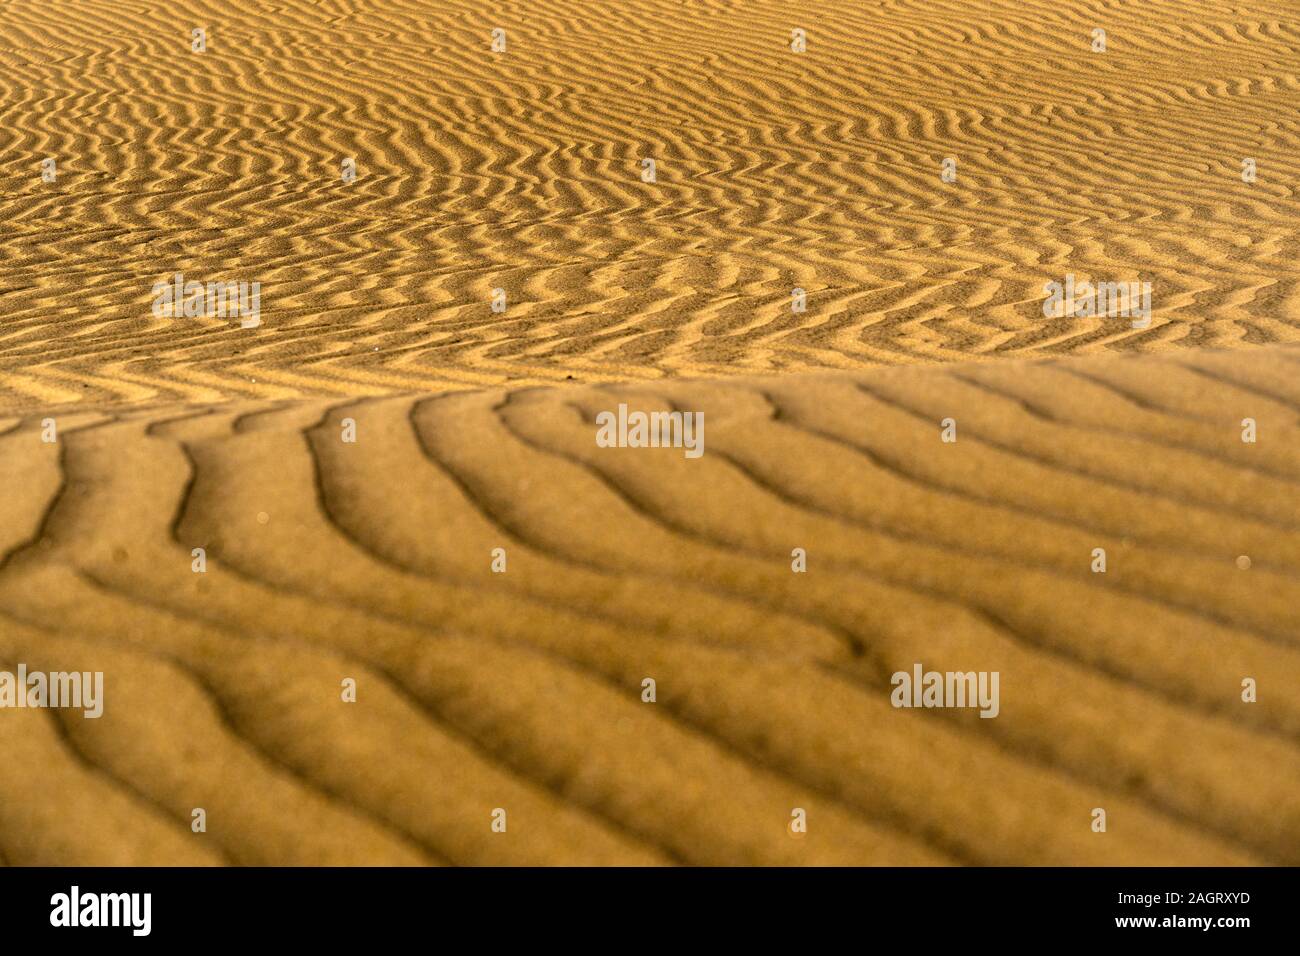 Sunset landscape on the sands of Maspaloms, Gran Canaria, Spain Stock Photo